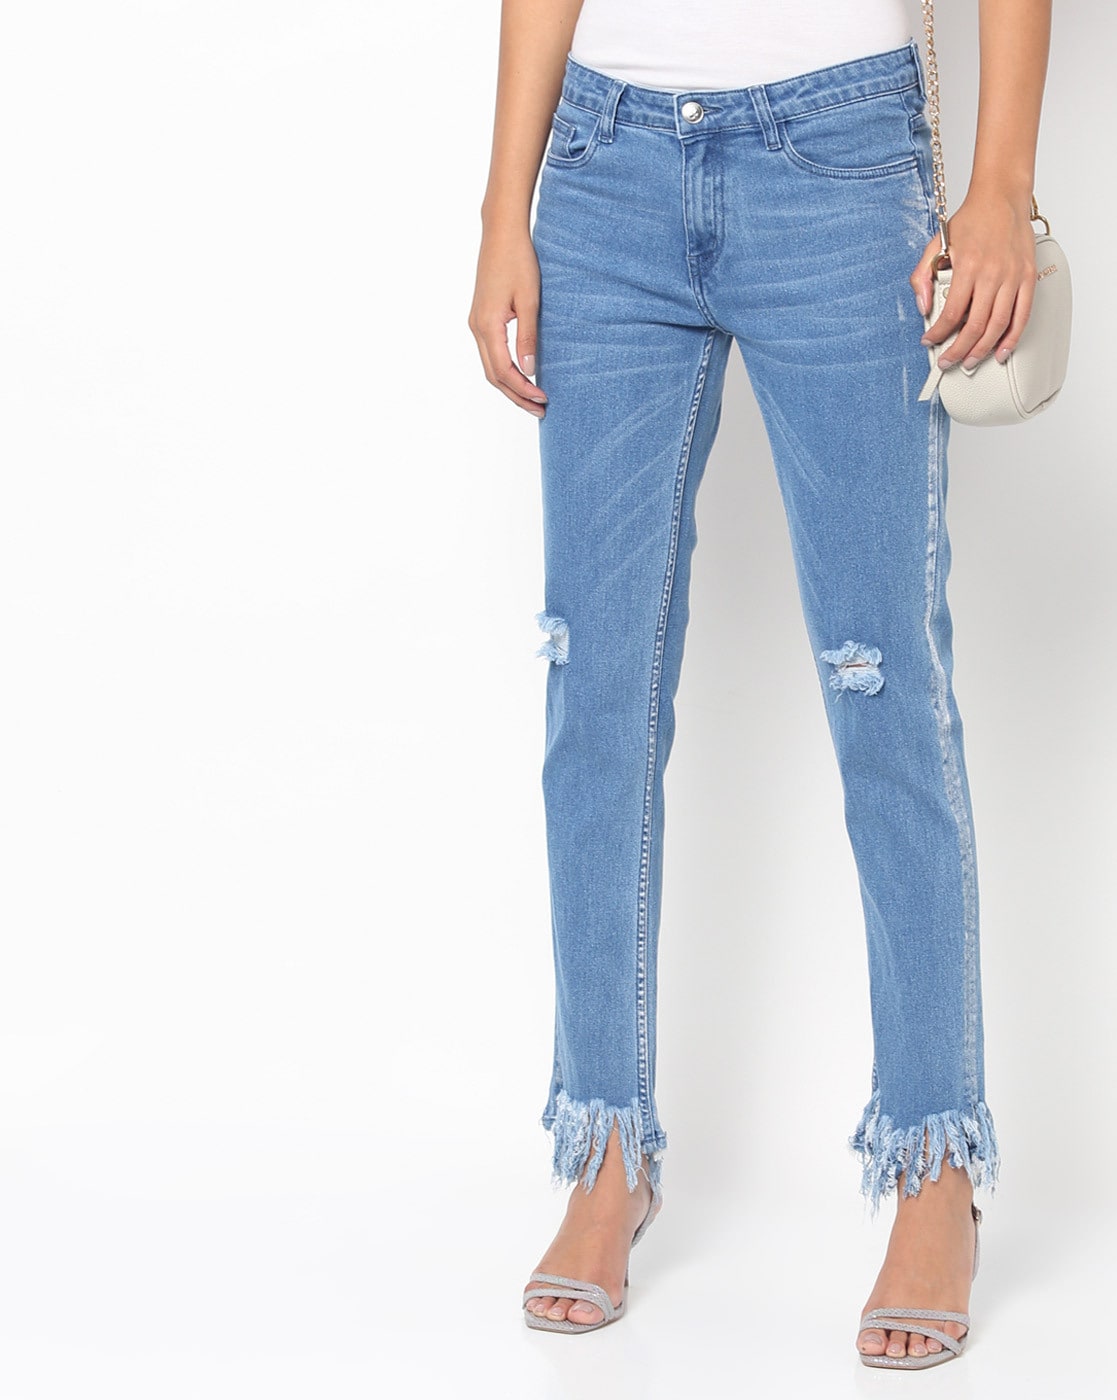 Buy Blue Jeans & Jeggings for Women by TALES & STORIES Online